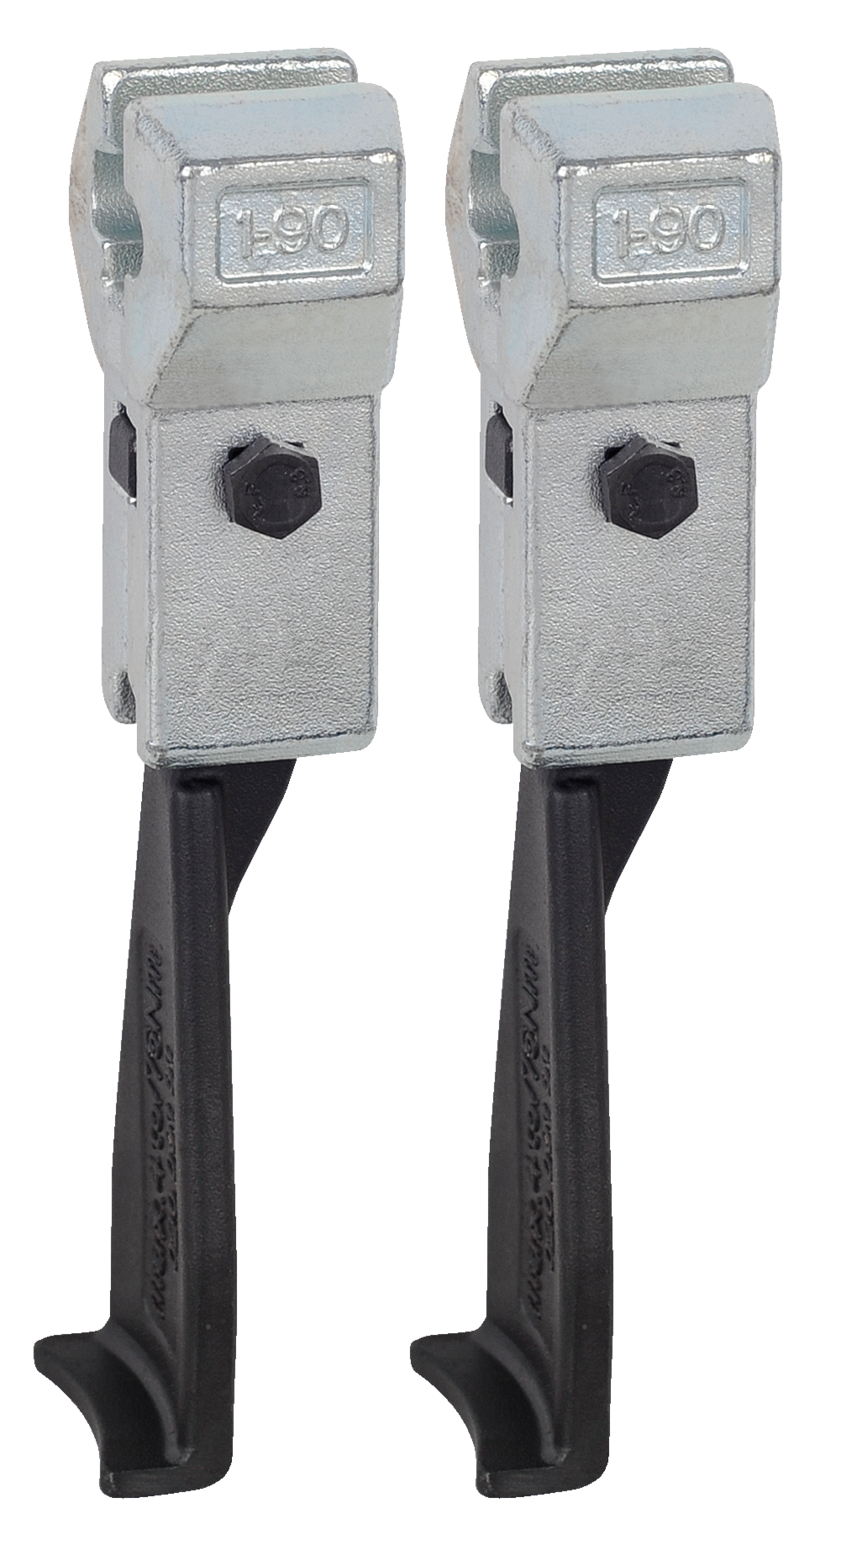 A pair of narrow 1-P series pullers for 2-arm universal pullers